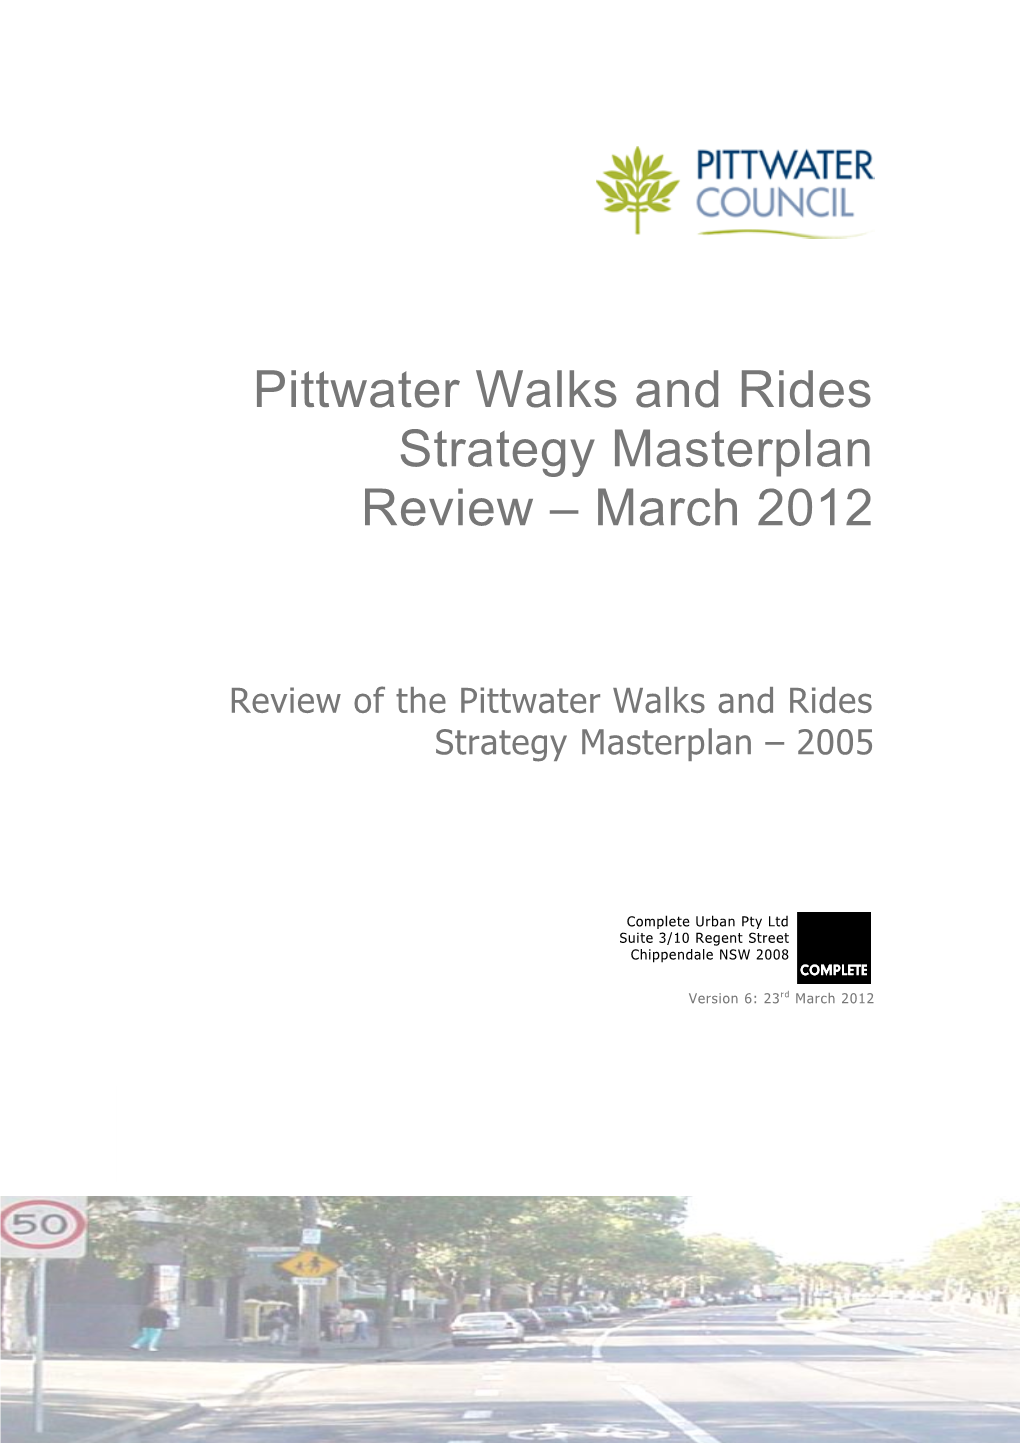 Pittwater Walks and Rides Masterplan Strategy